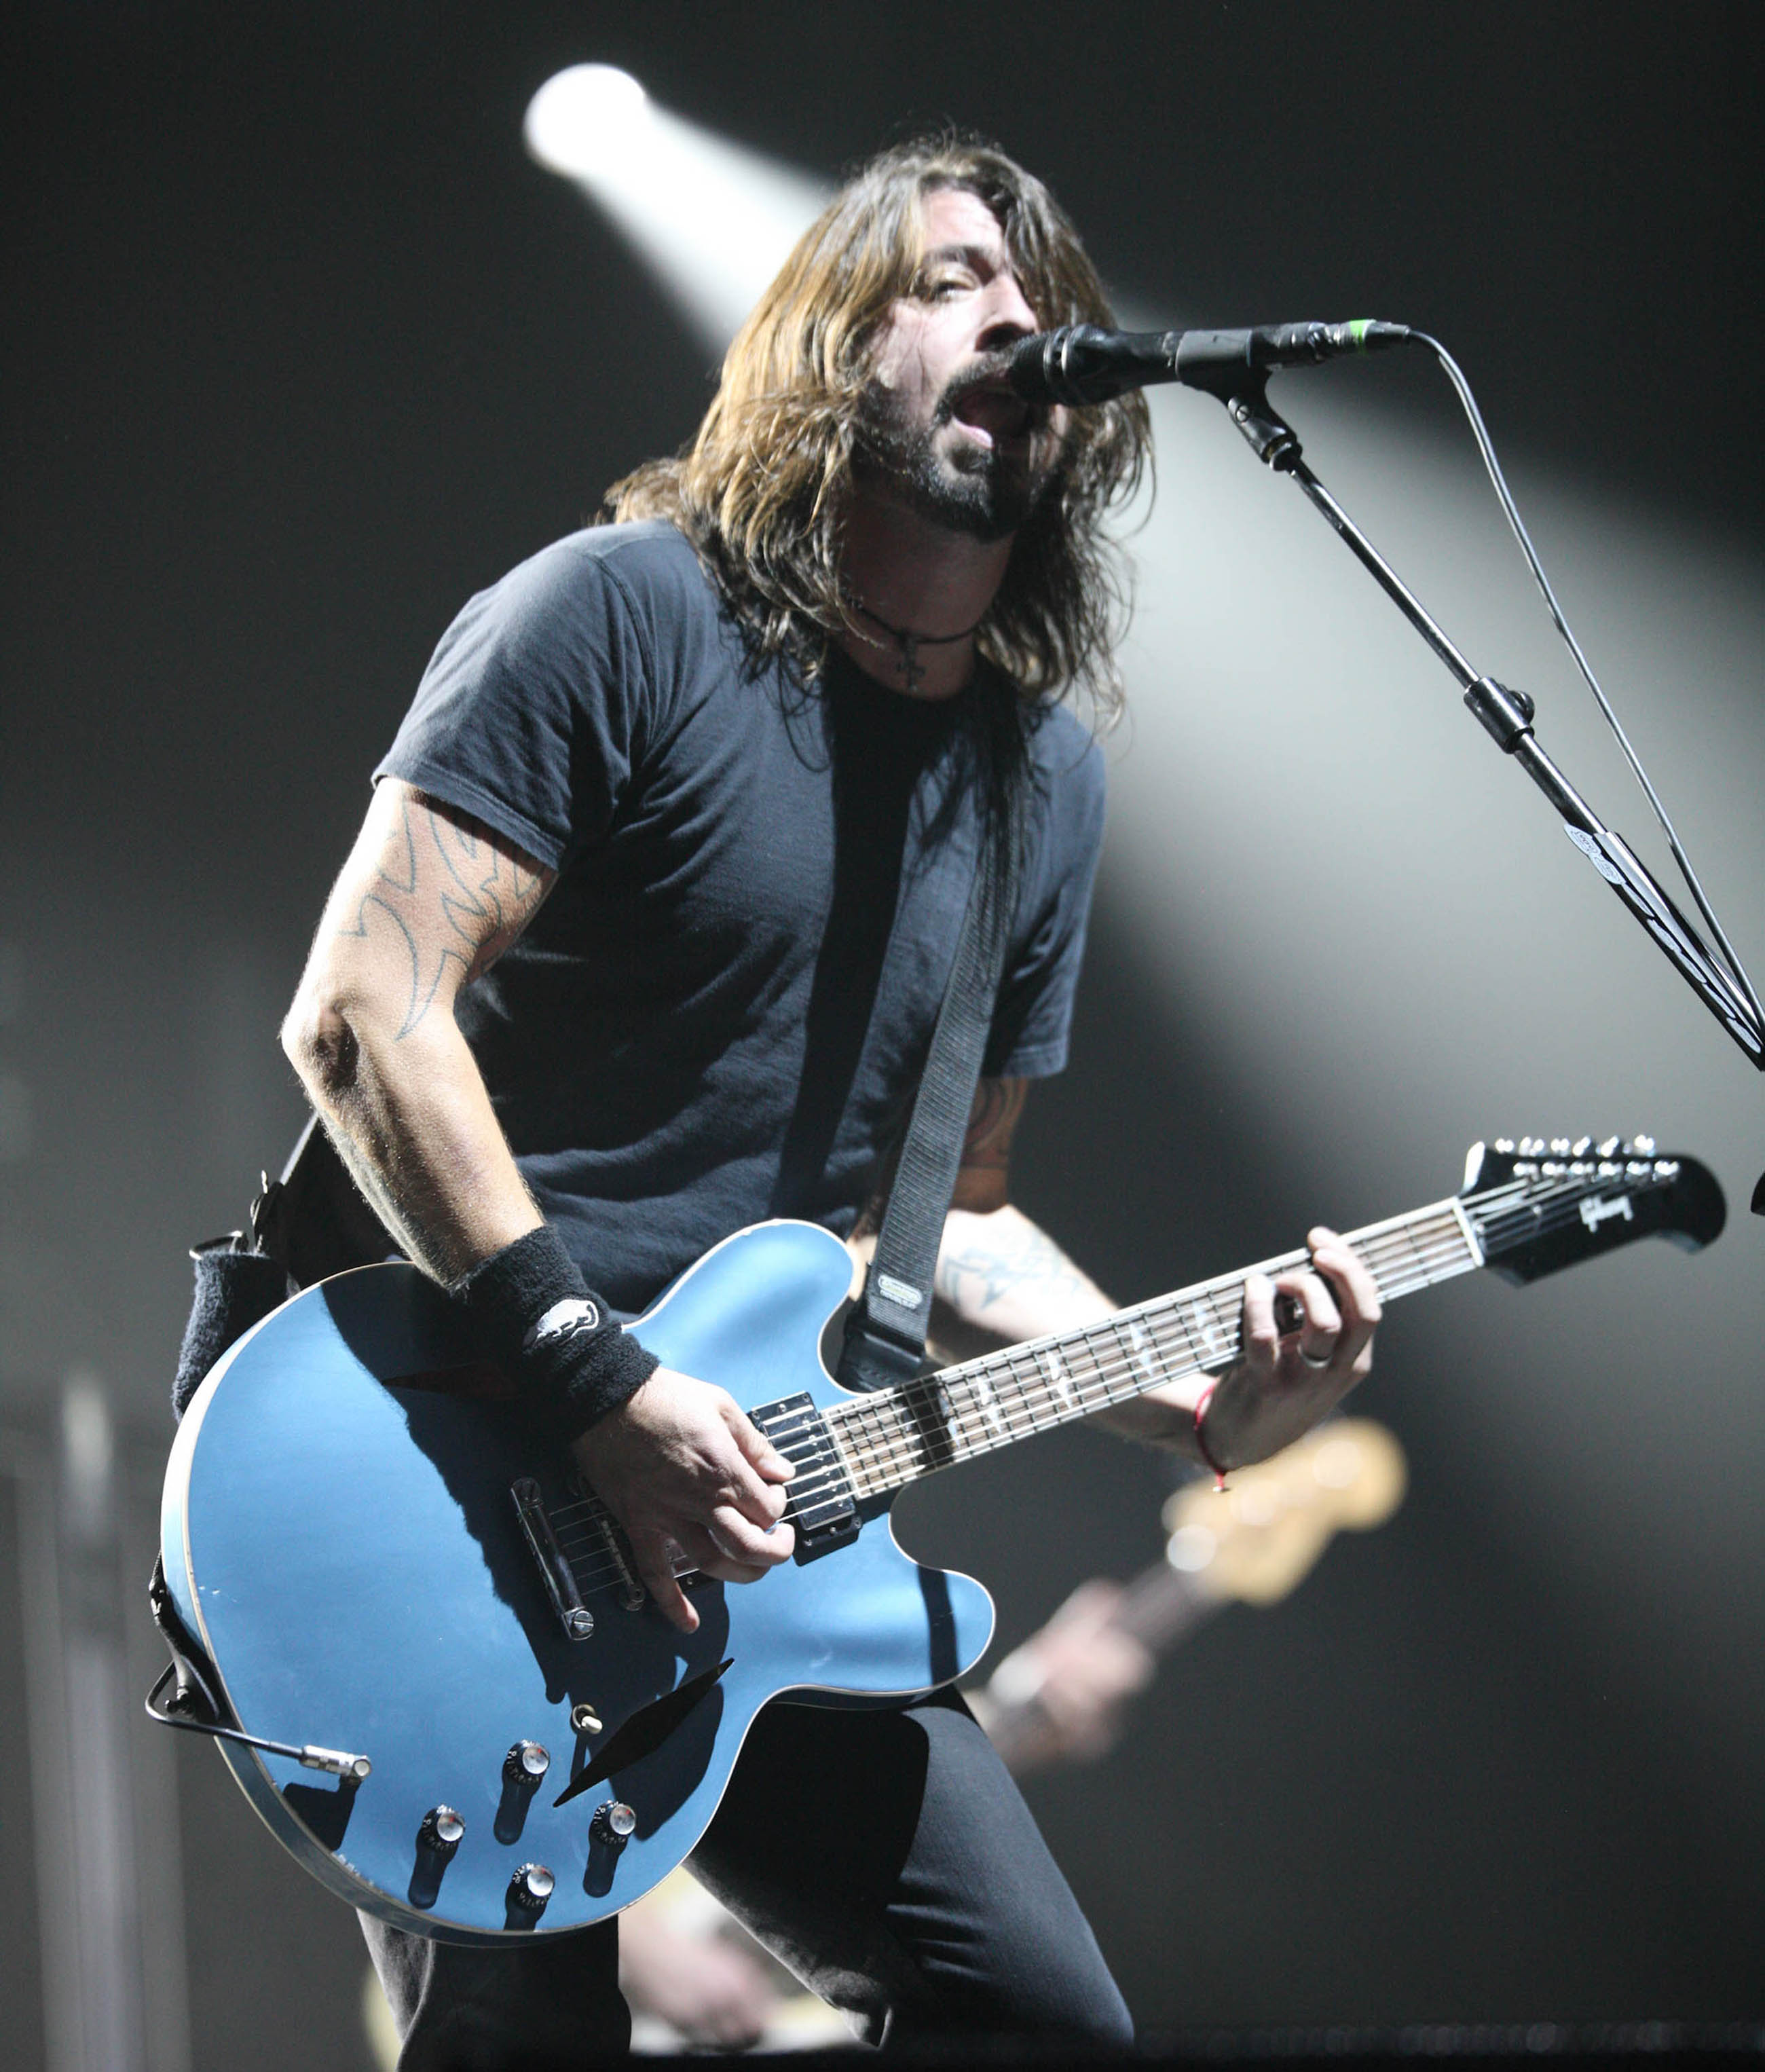 Spelning, Rock, Foo Fighters, Musik, Rockband, Band, Dave Grohl